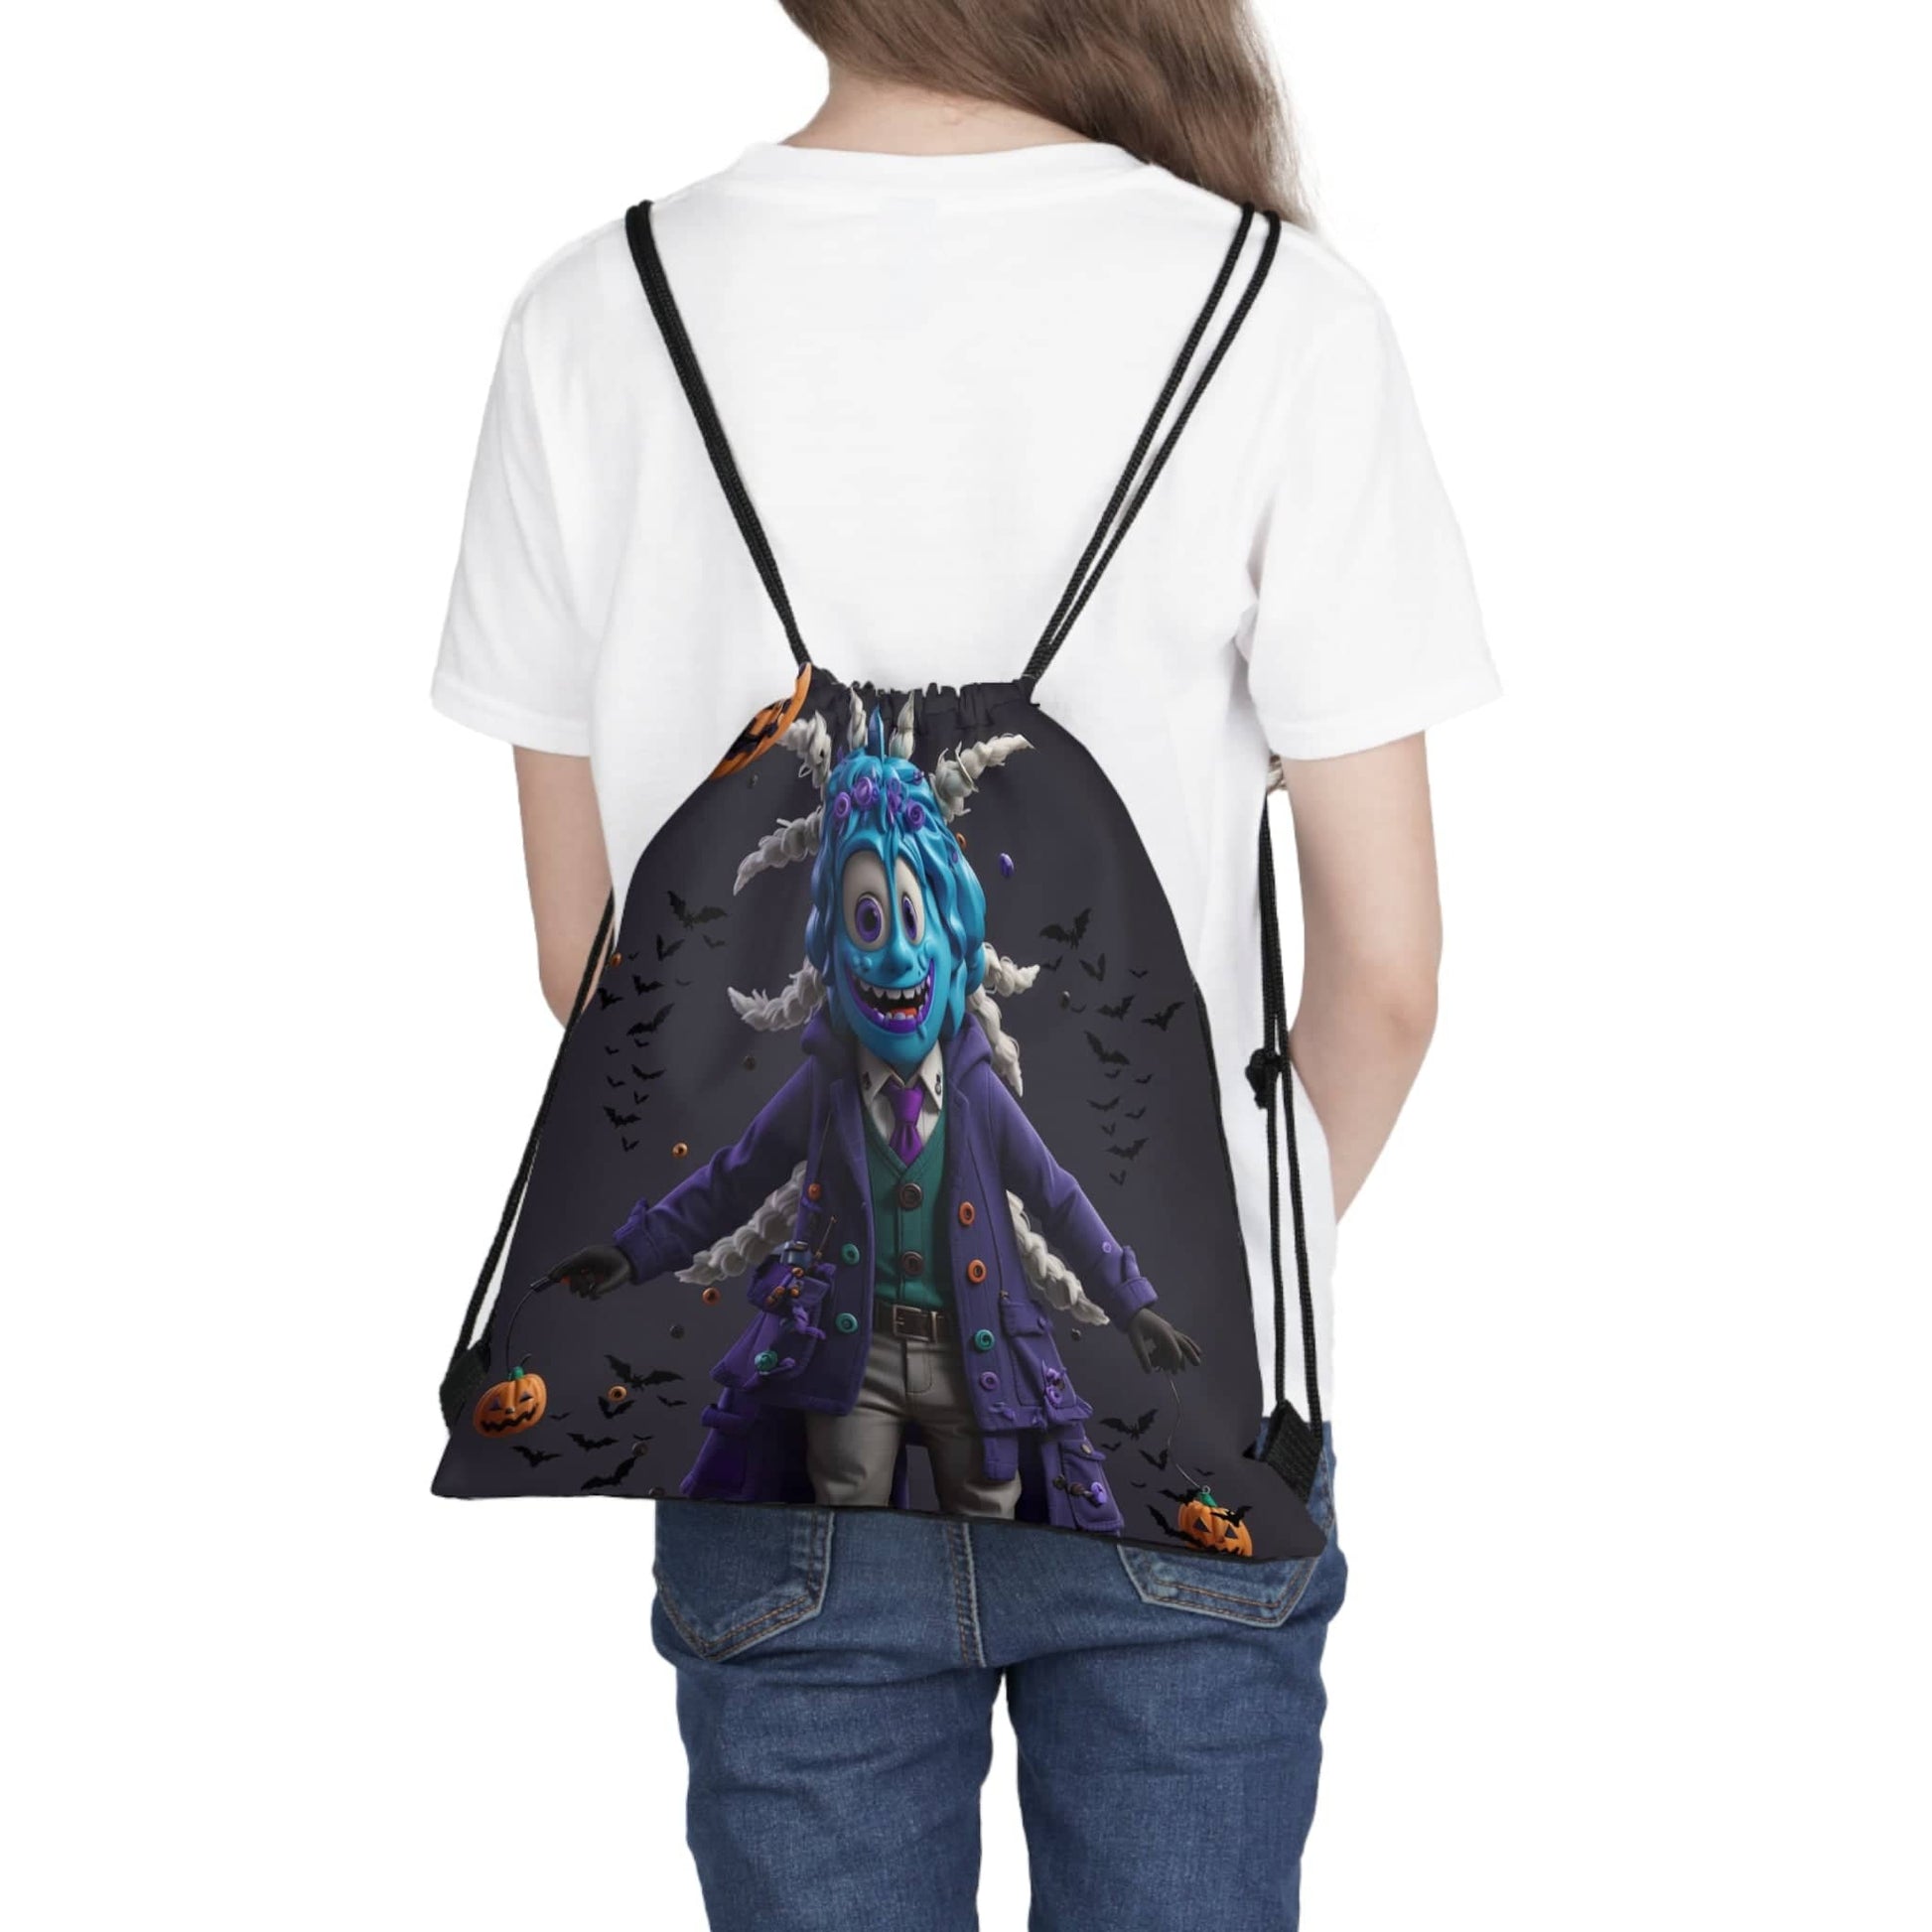 Ghoul's Night Out Drawstring Bag "A Spine-Chilling Companion for Halloween Adventures!" Bags Bigger Than Life   